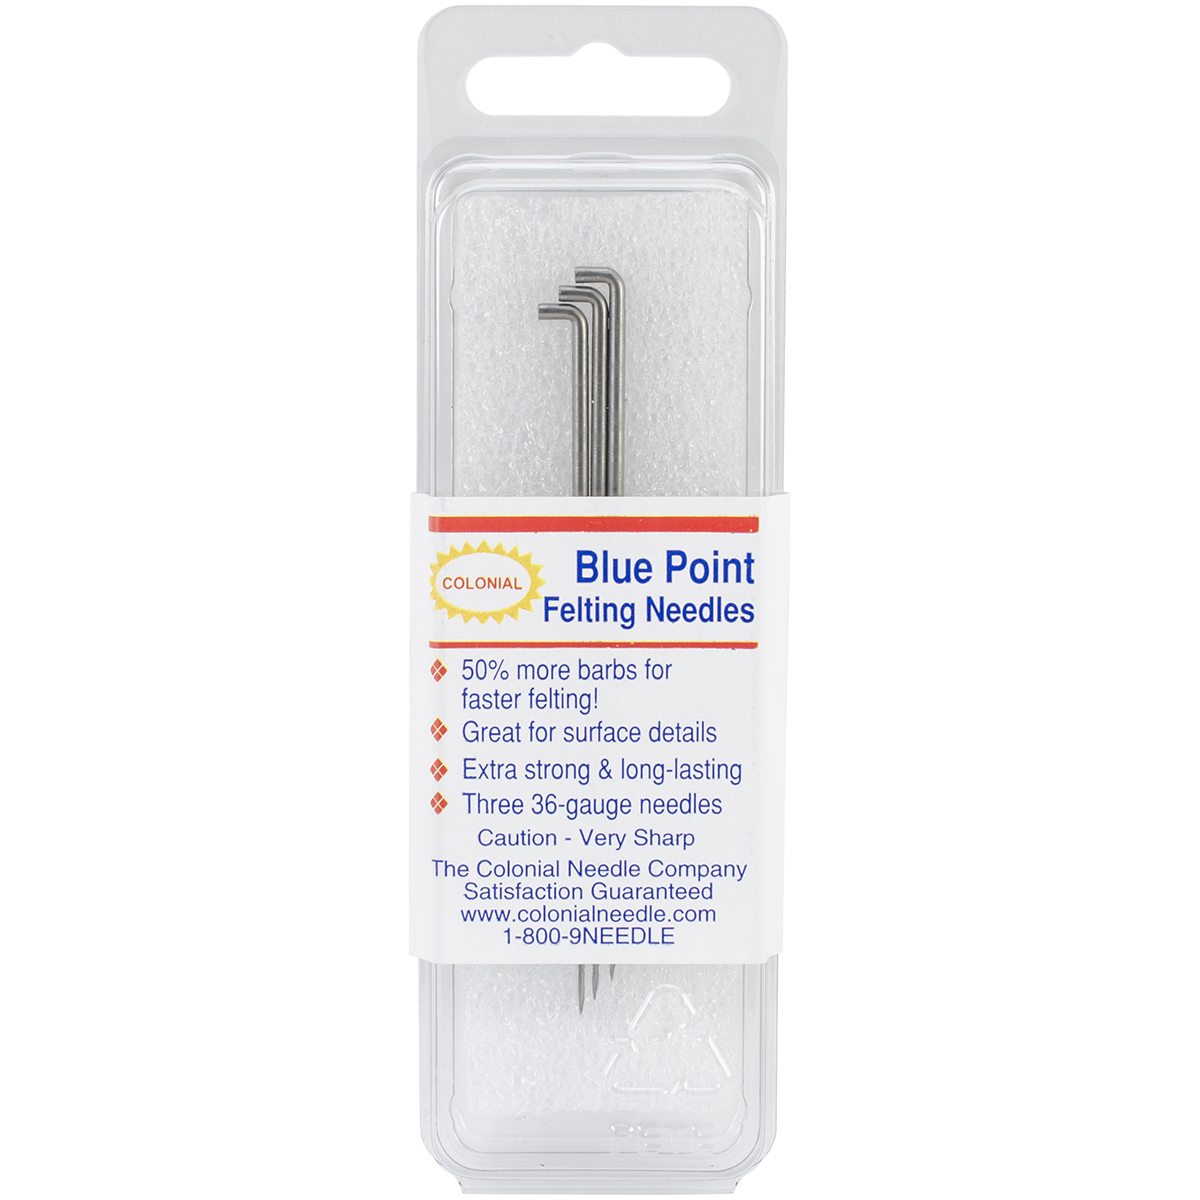 Colonial Blue Point Felting Needles Triangle 36 Don't miss the campaign 3 Pkg-Size Super popular specialty store CNFN